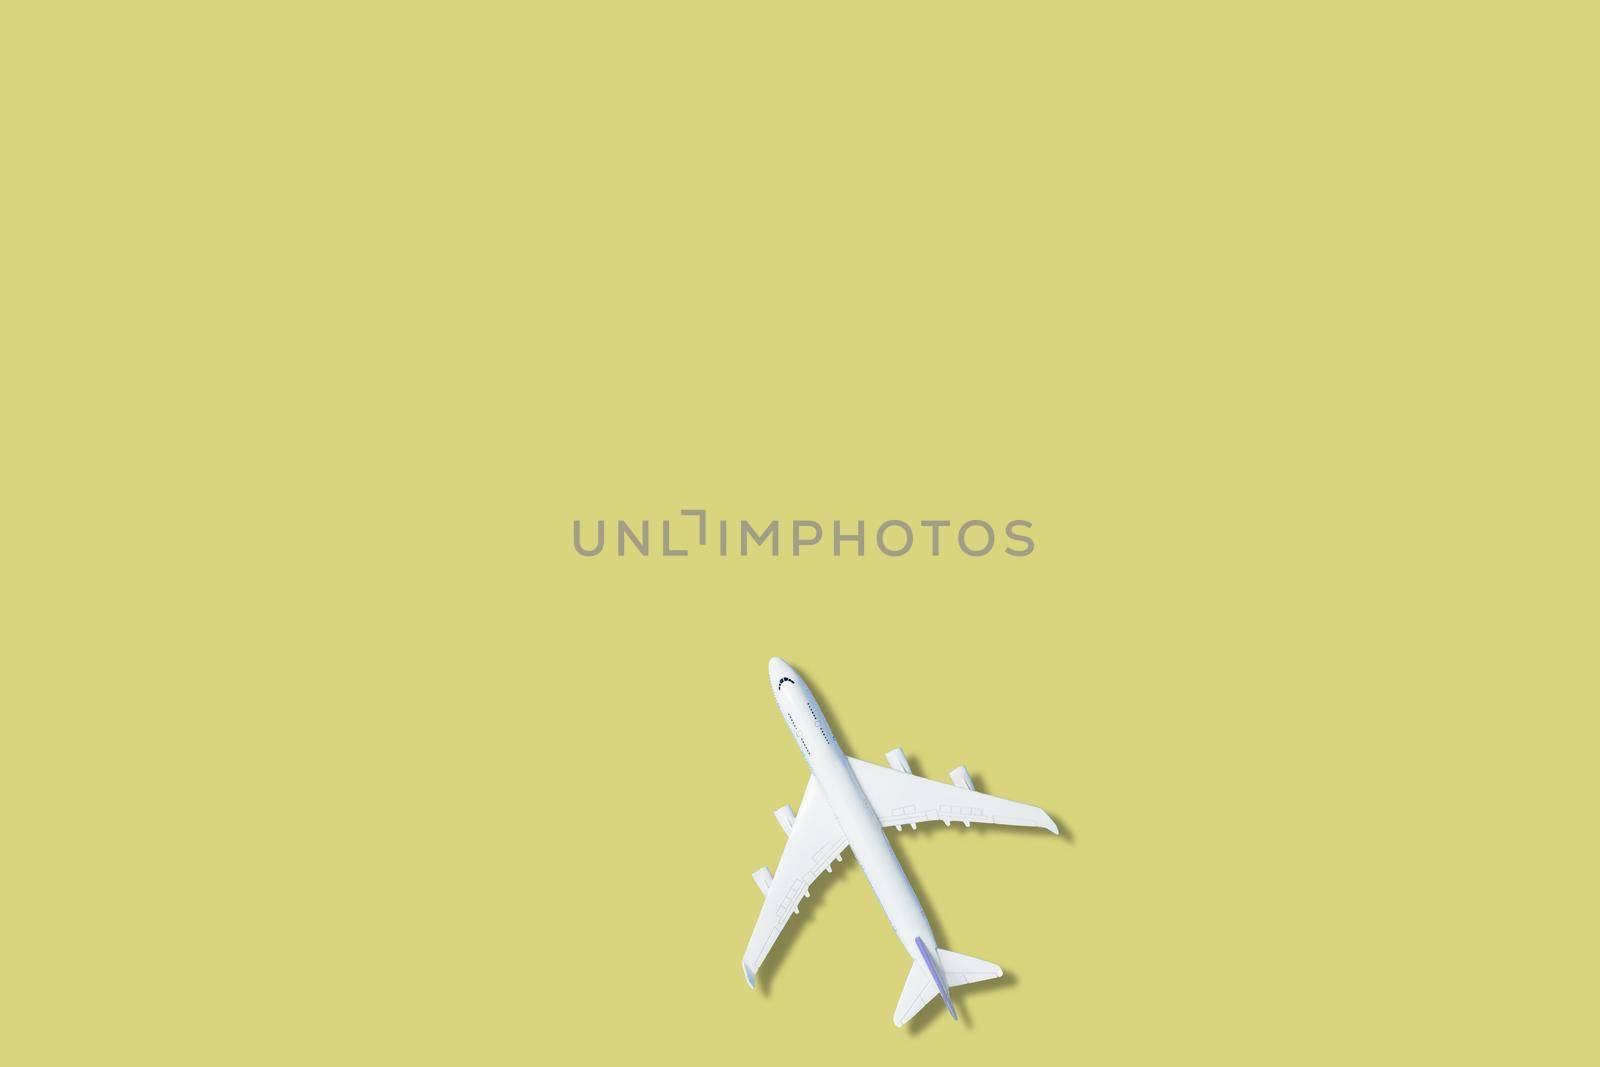 Model plane,airplane on green color background.